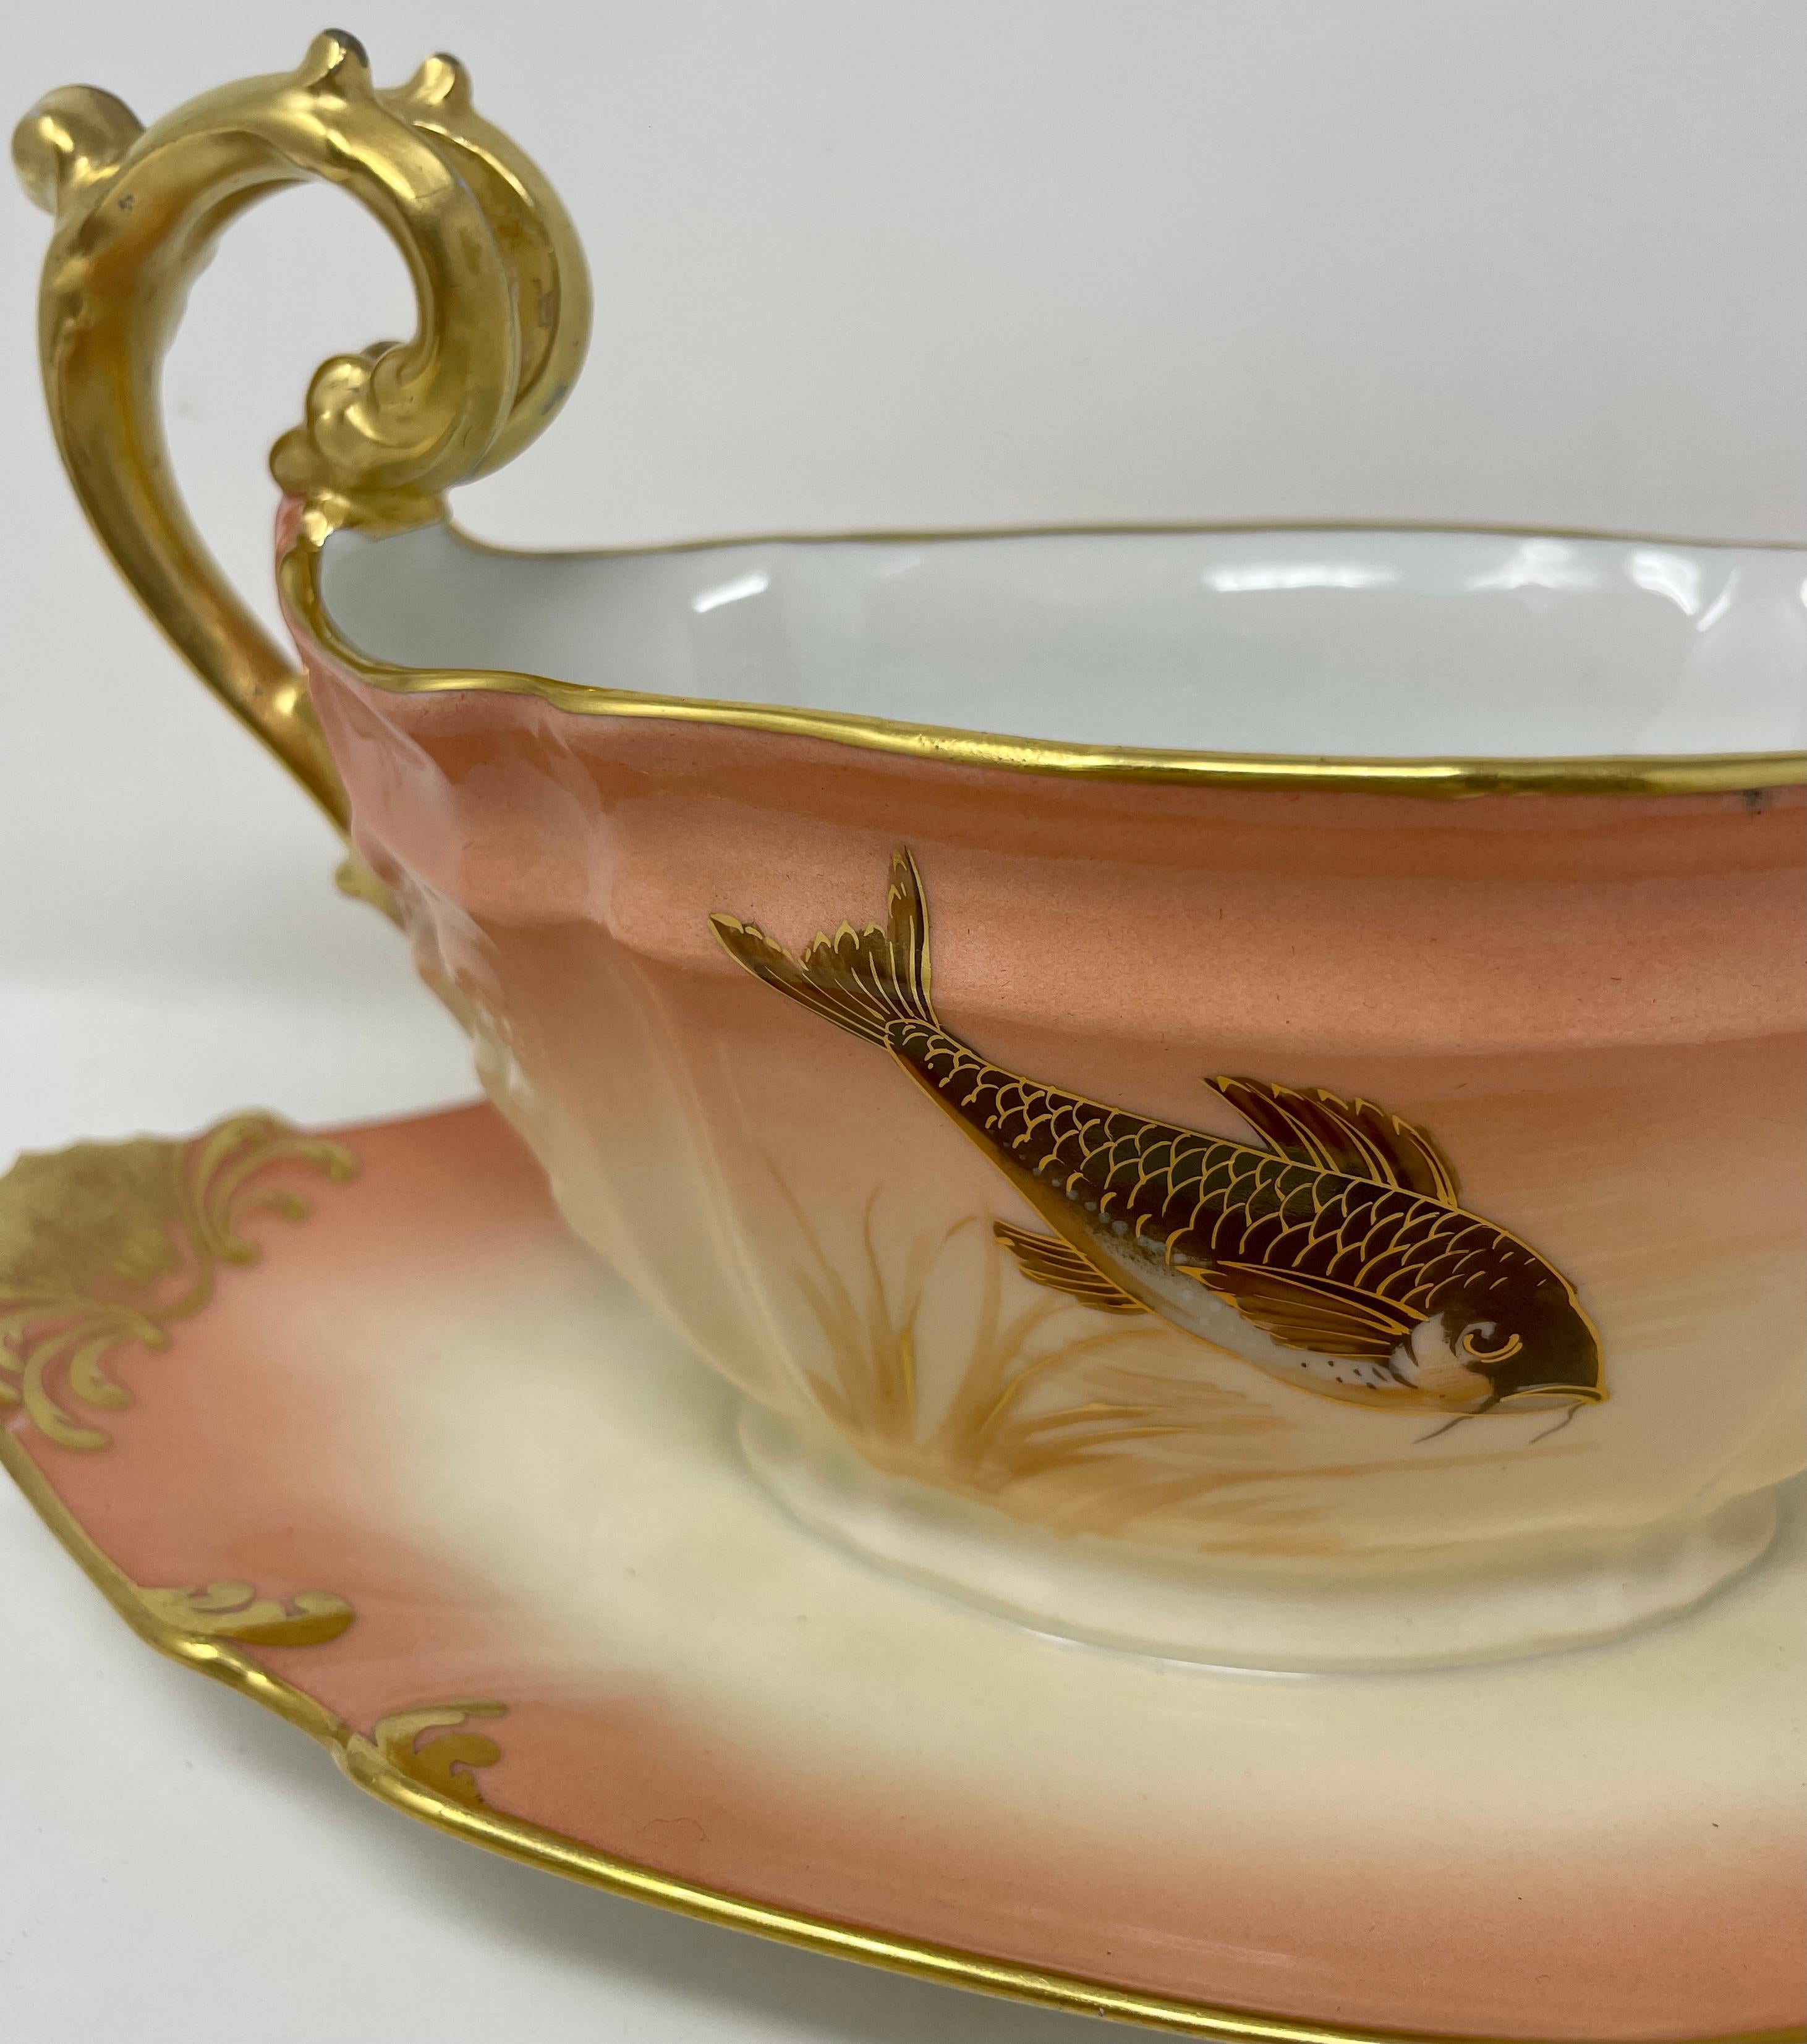 Set of 14 Antique French Hand-Painted Limoges Porcelain Fish Service, Circa 1890 For Sale 3